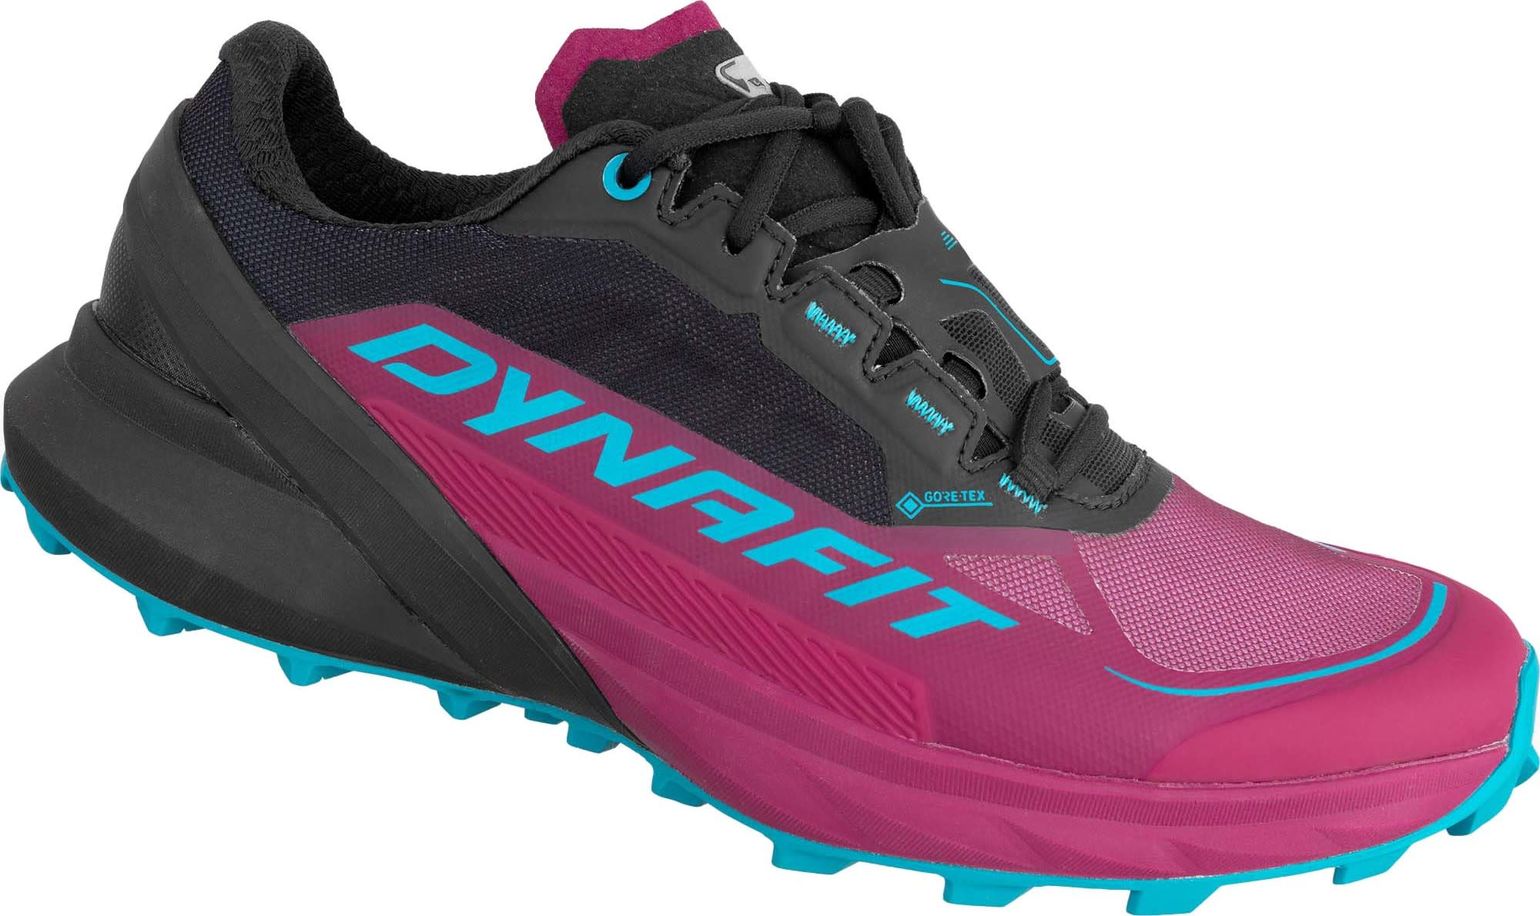 Women's Ultra 50 Gore-Tex black out/beet red